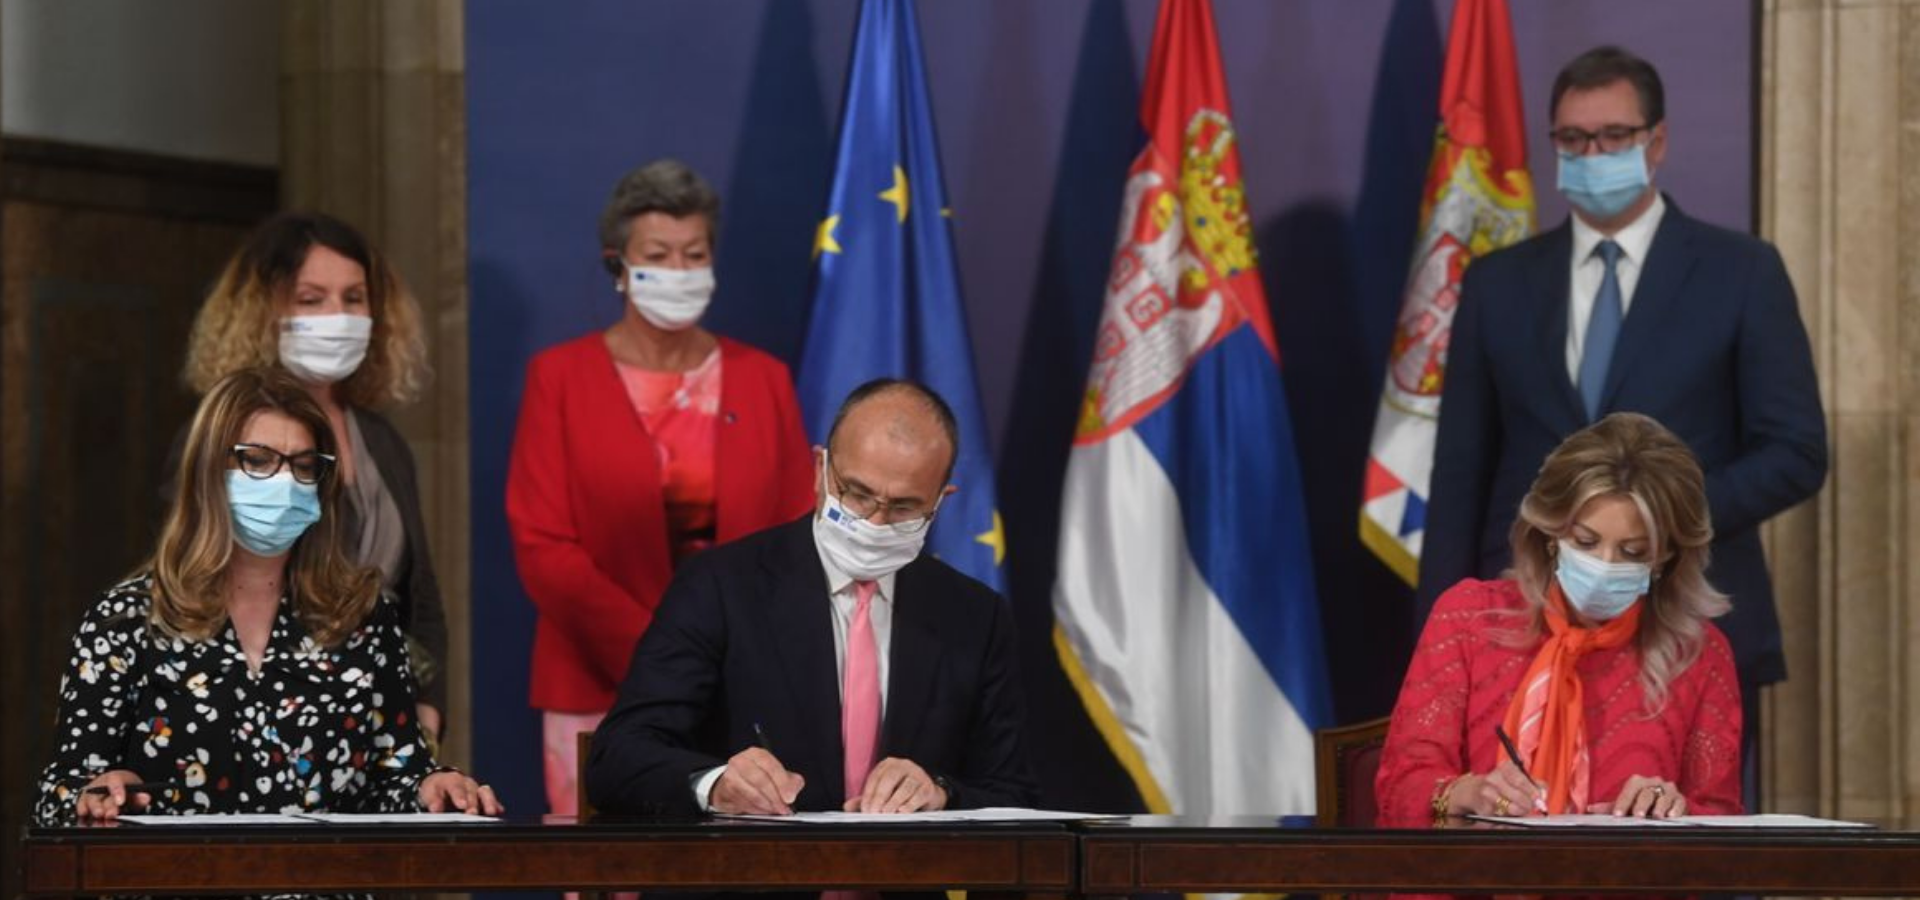 An agreement signed for the continuation of EU Support to Migration Management in Serbia